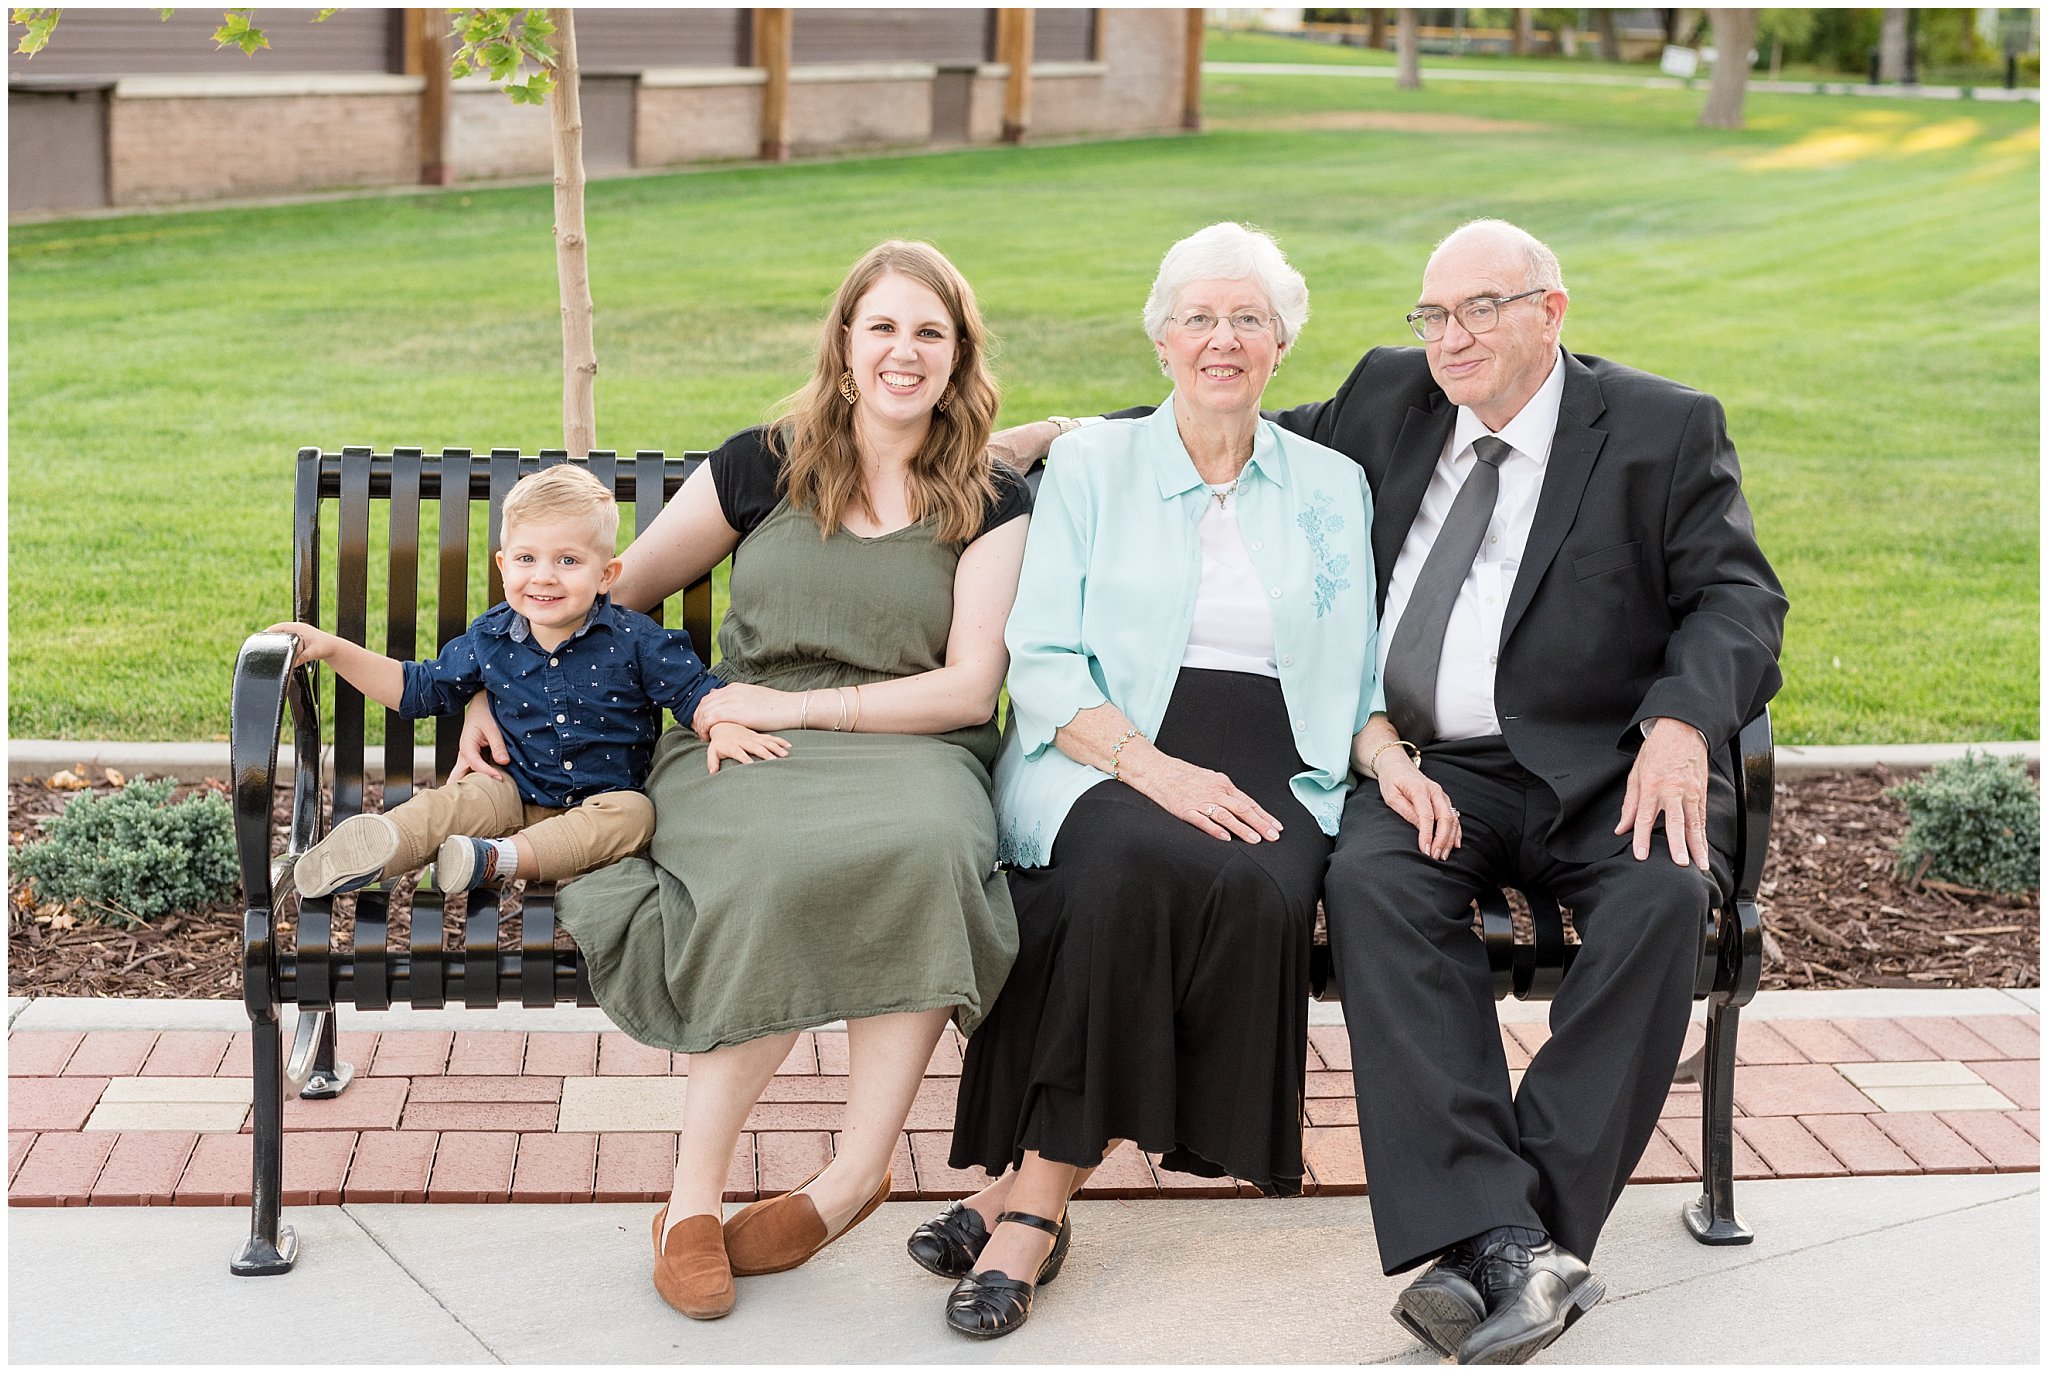 Jessie Liam and grandparents | Layton Commons Park | Layton Couples Photographer | Jessie and Dallin